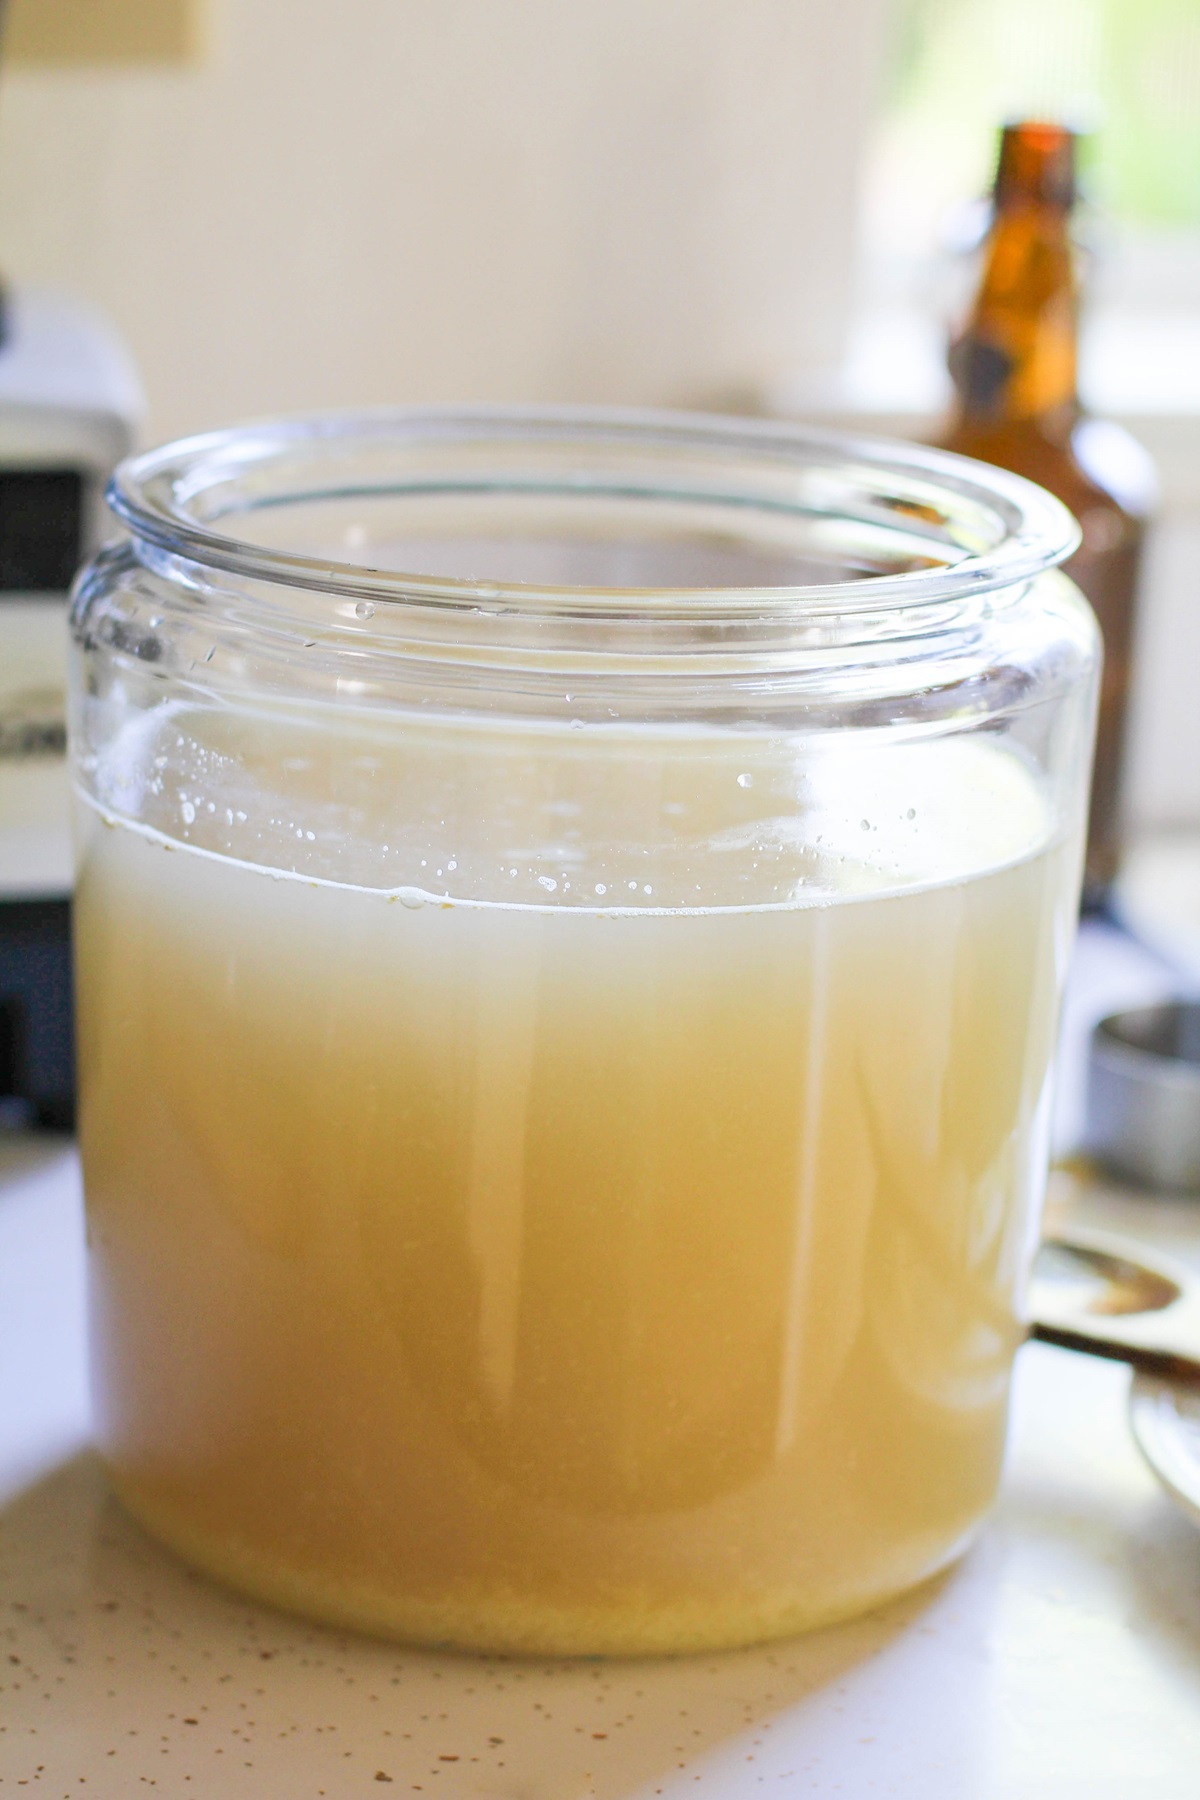 How to Make Probiotic Ginger Beer - a naturally fermented probiotic-rich beverage that you can make at home | TheRoastedRoot.net